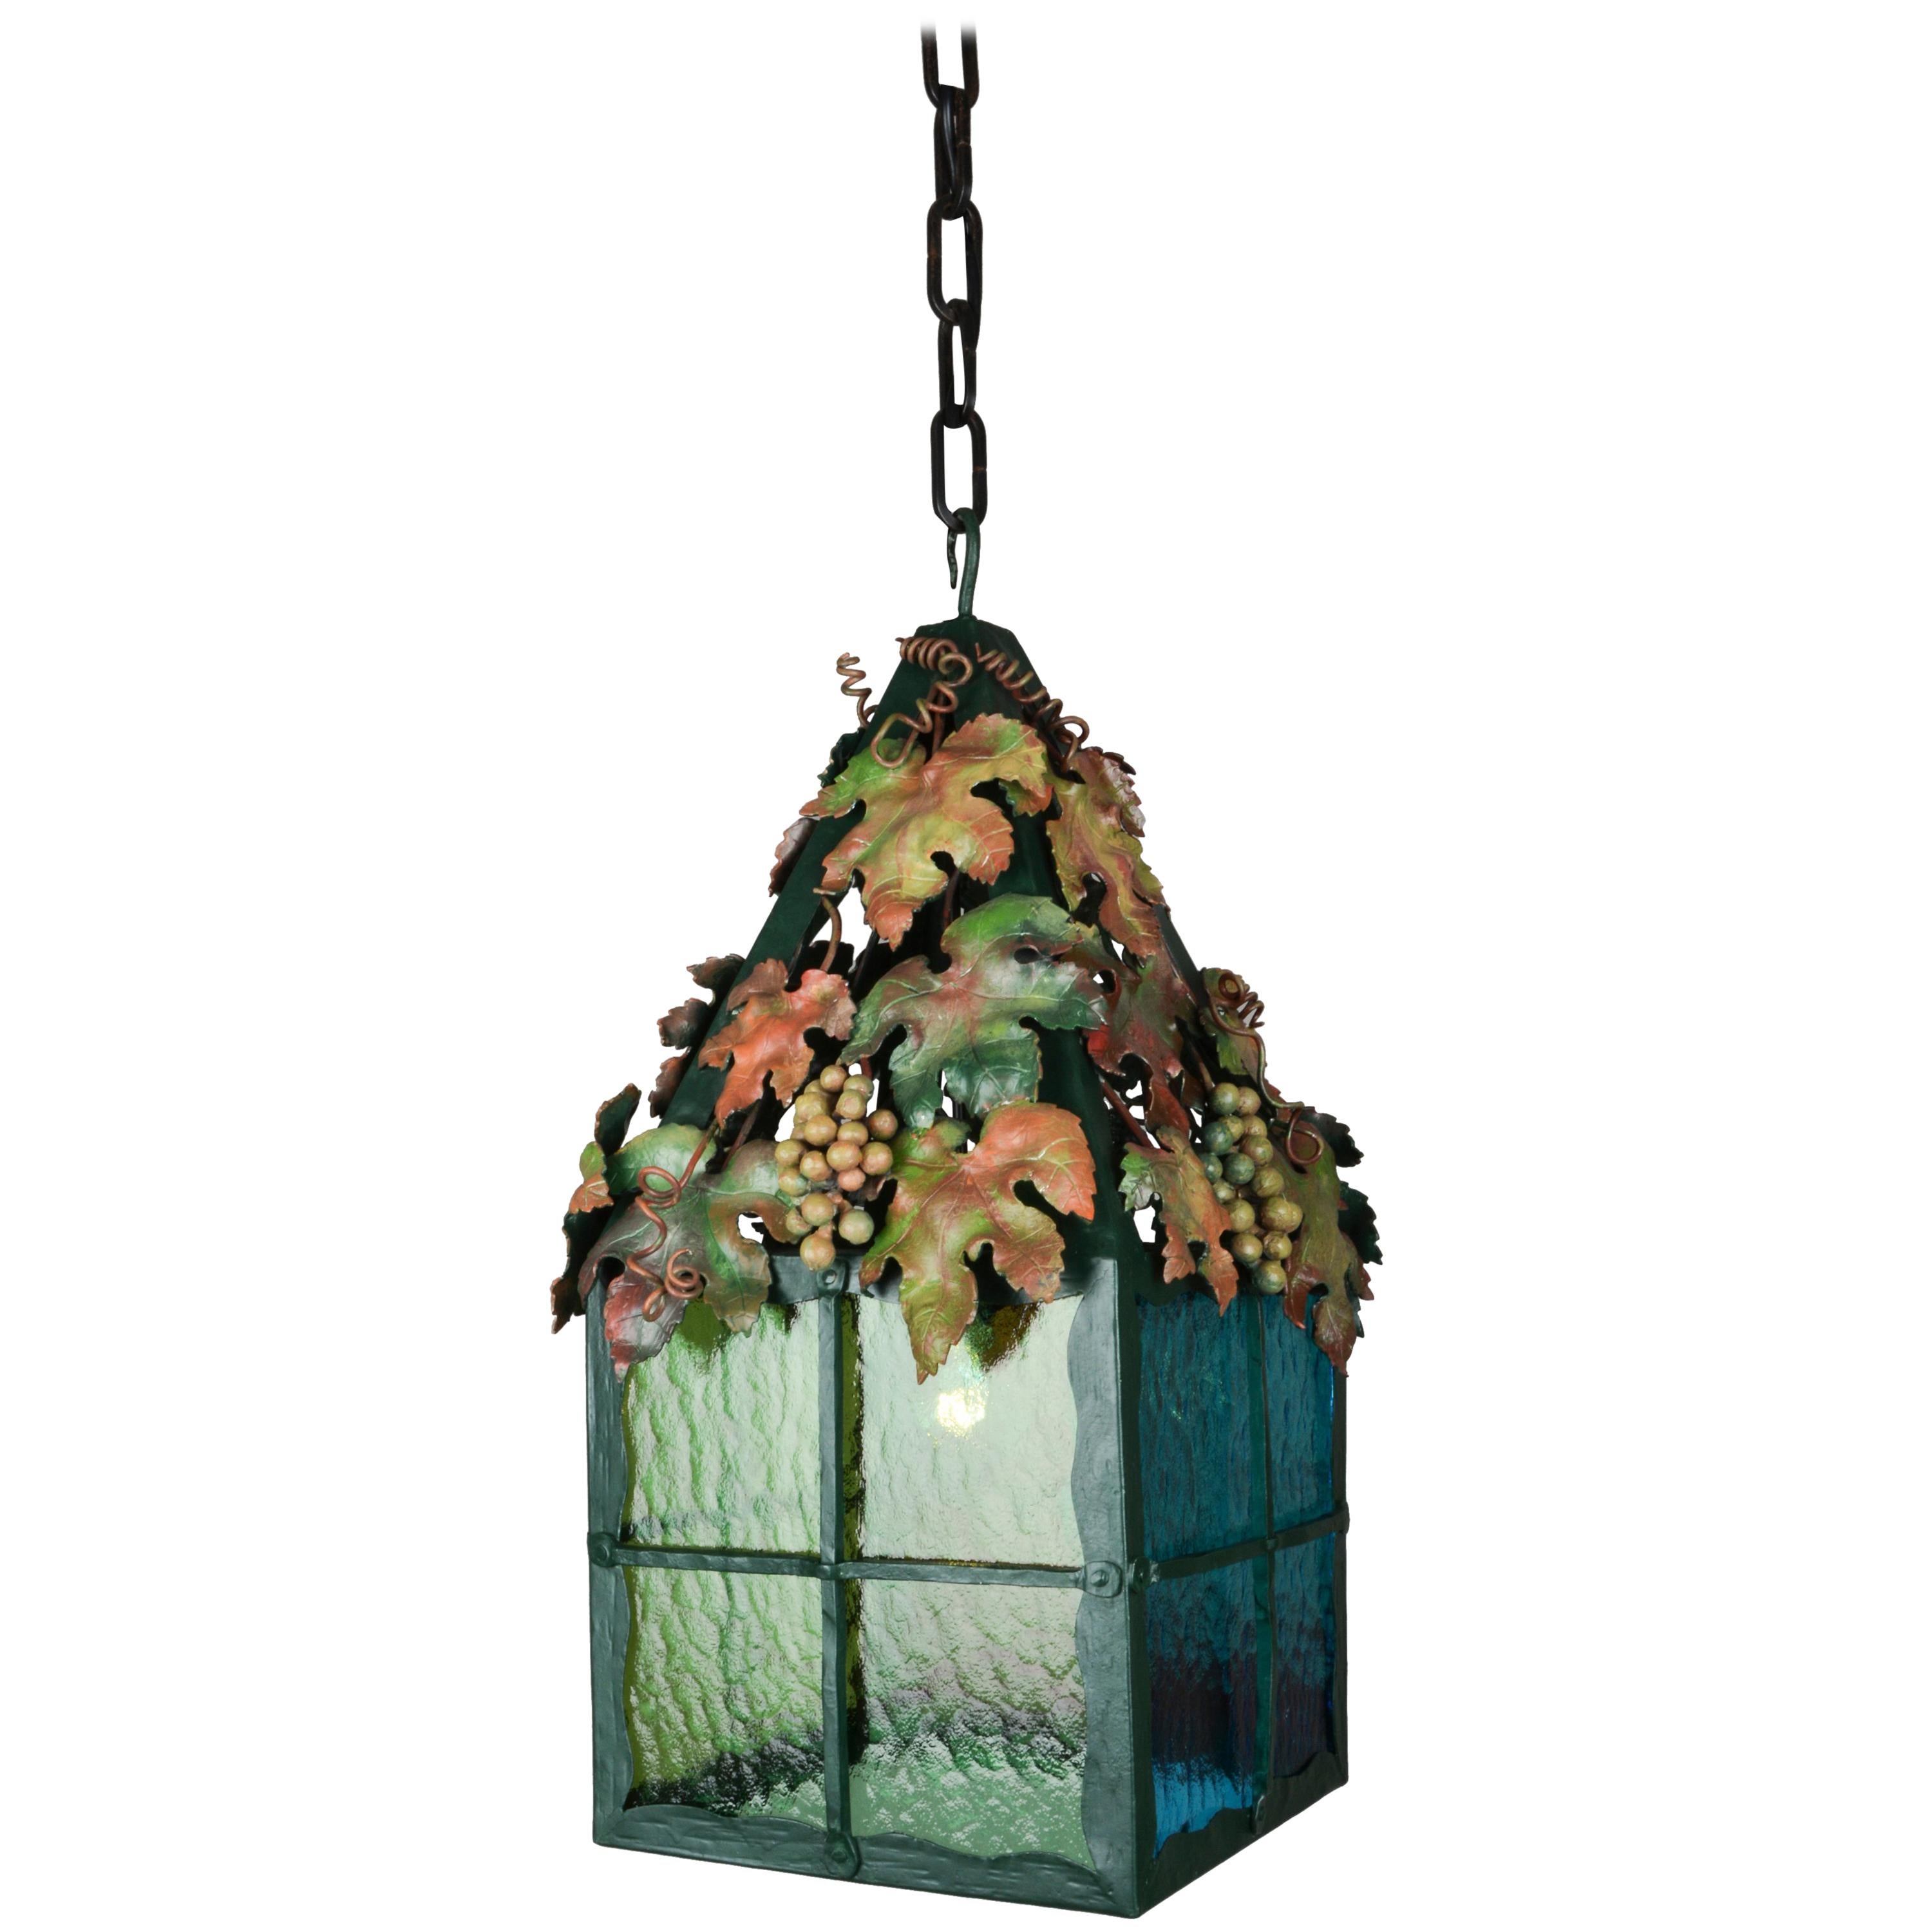 Viennese “Heurigen” Lantern of Wrought Iron with Tinted Glass Wine Leaf Decor For Sale